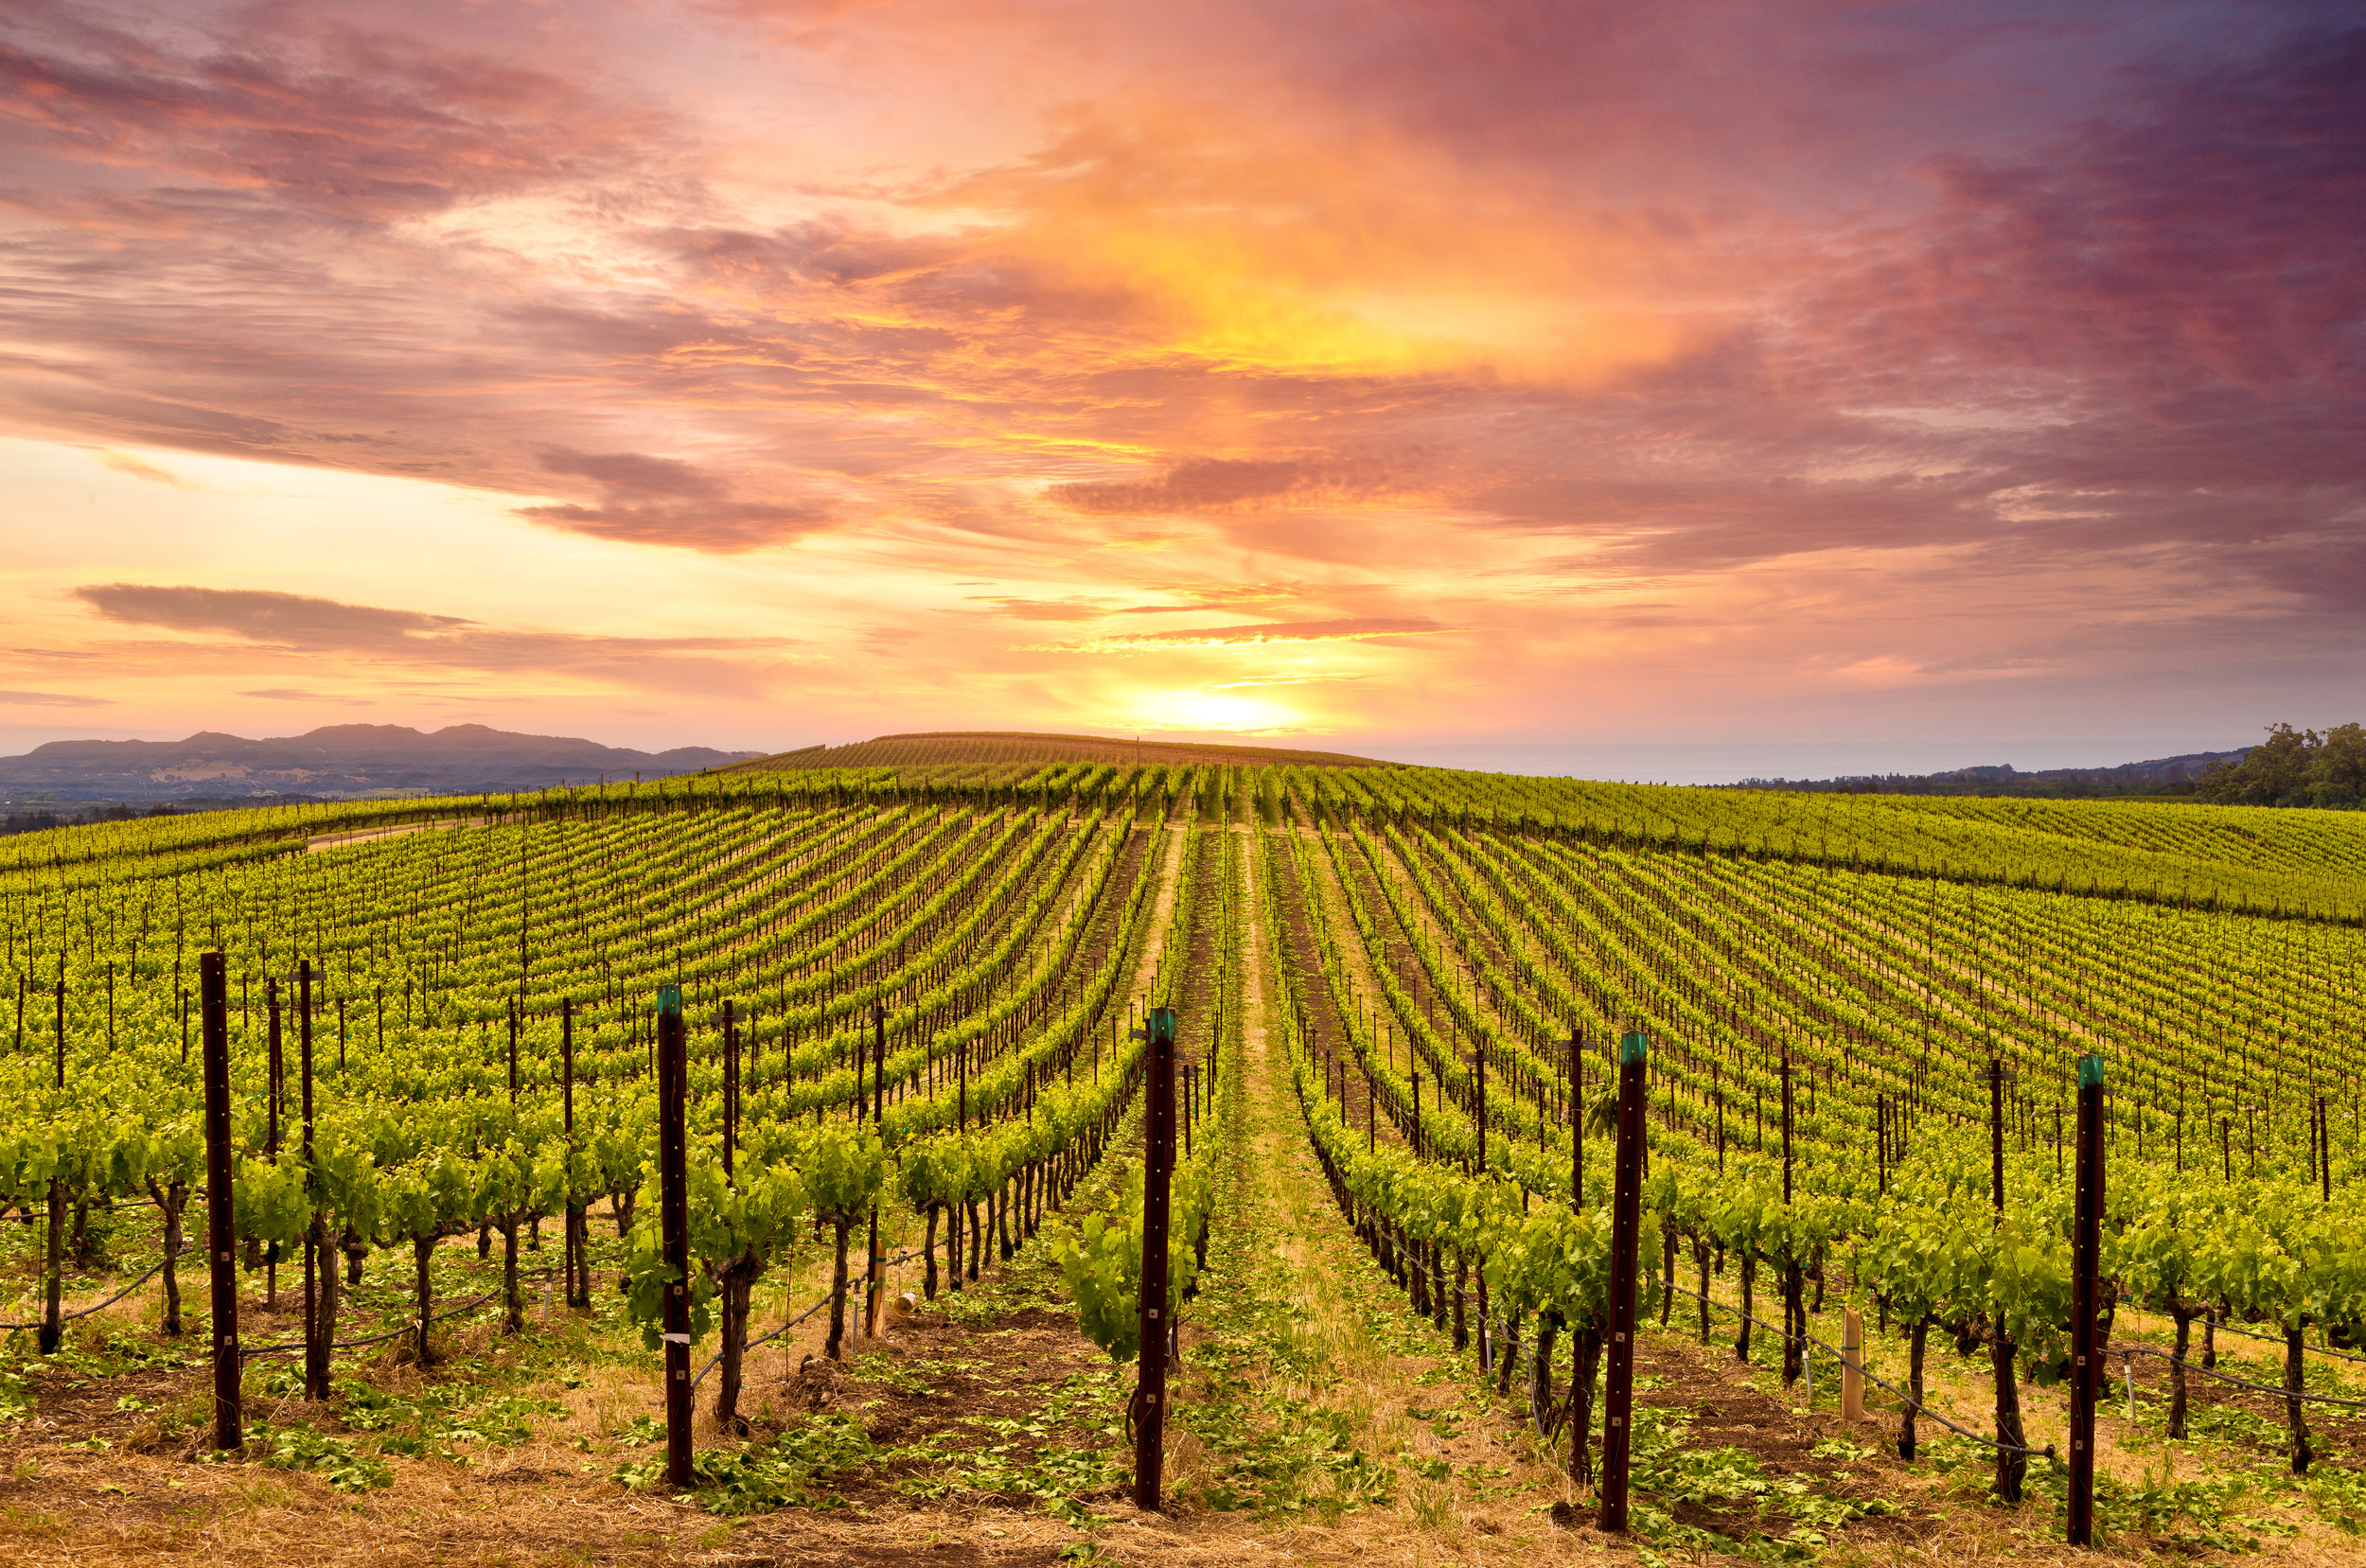 <p>Another option to the itinerary above starting in Eugene is to skip nature and head right into wine country via the Willamette Scenic Highway. An easy day trip, or you can stay a few nights and visit every winery.</p><p>You may also like: <a href='https://www.yardbarker.com/lifestyle/articles/20_ways_to_make_your_home_more_inviting_for_guests_090923/s1__35920406'>20 ways to make your home more inviting for guests</a></p>